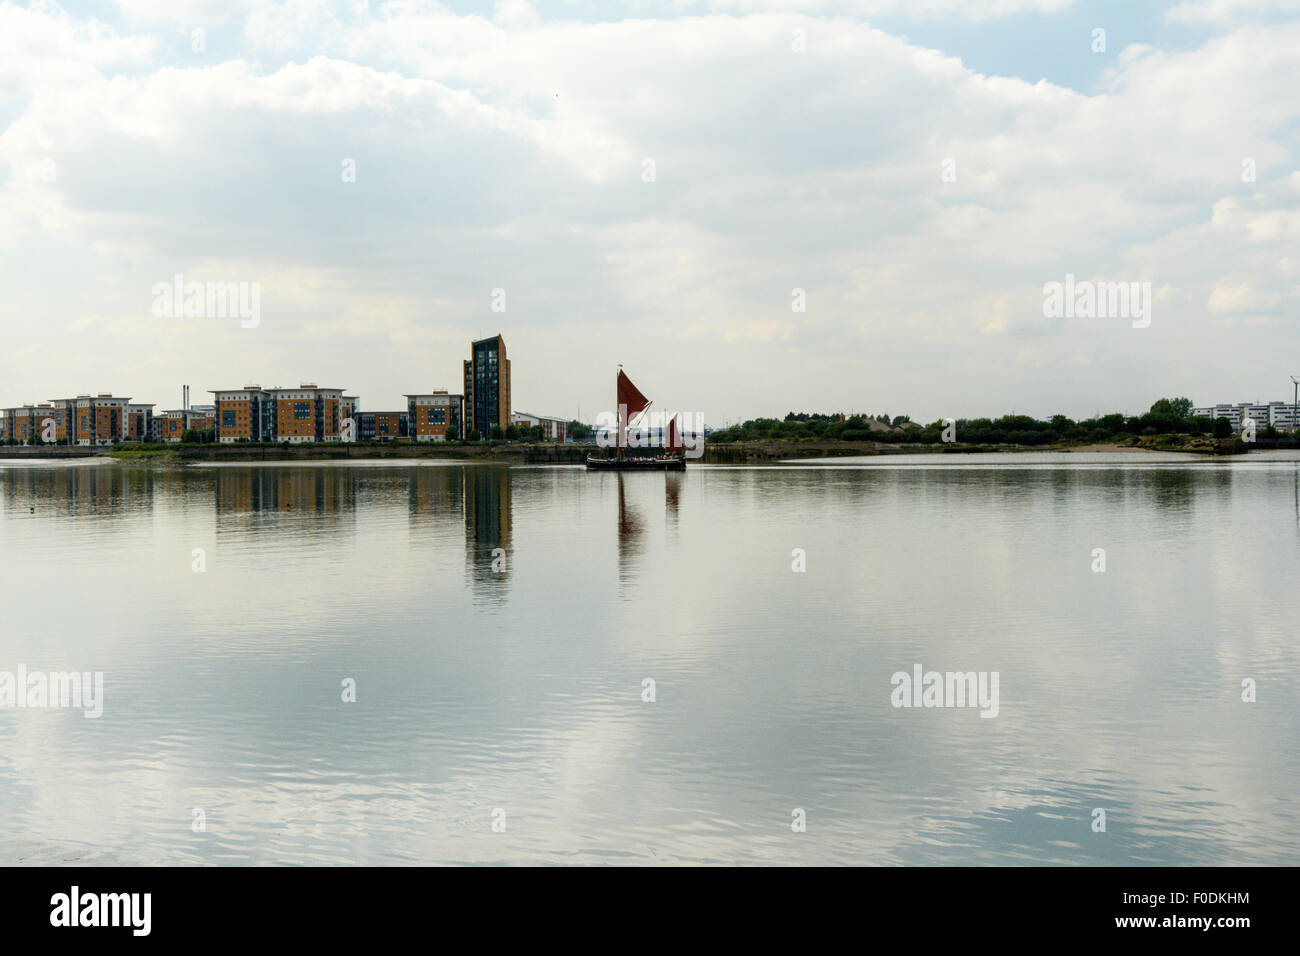 An old Thames Sailing Barge navigates a placid River Thames near the Thames Barrier in London, UK. Stock Photo